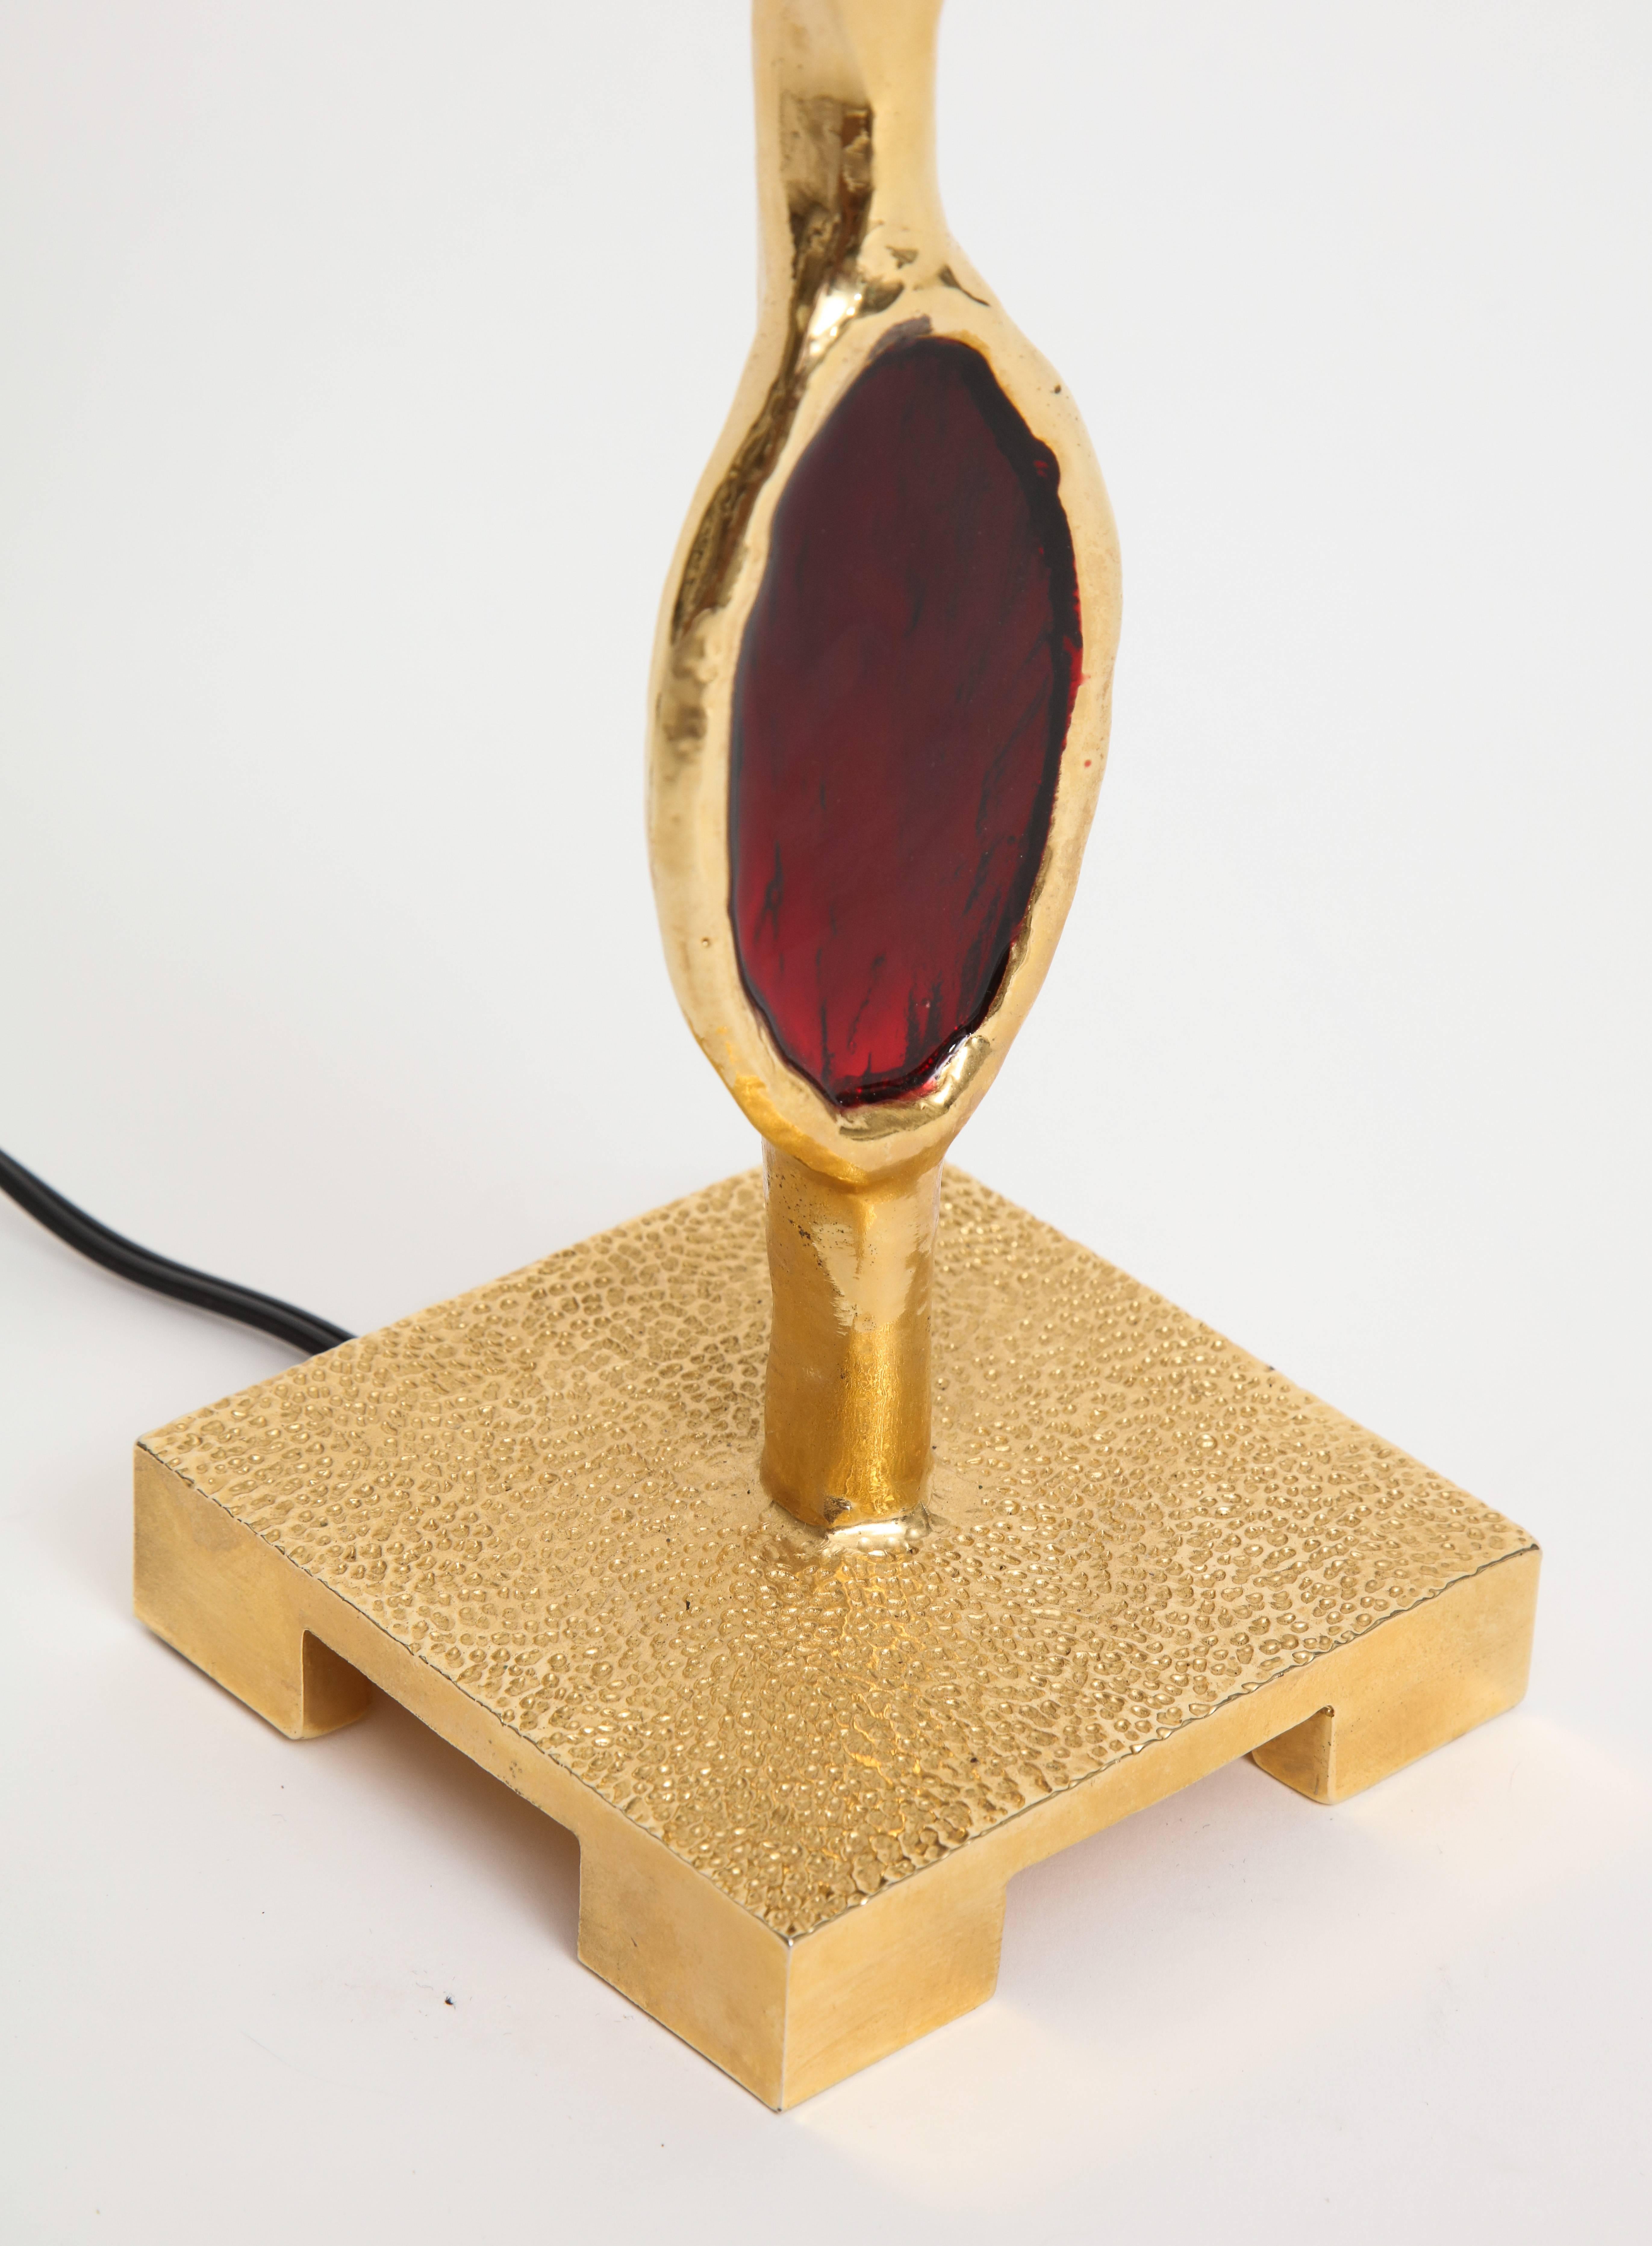 Modern Fondica Bronze Table Lamp with Enameled Red Jewel Sections, 2000s, France